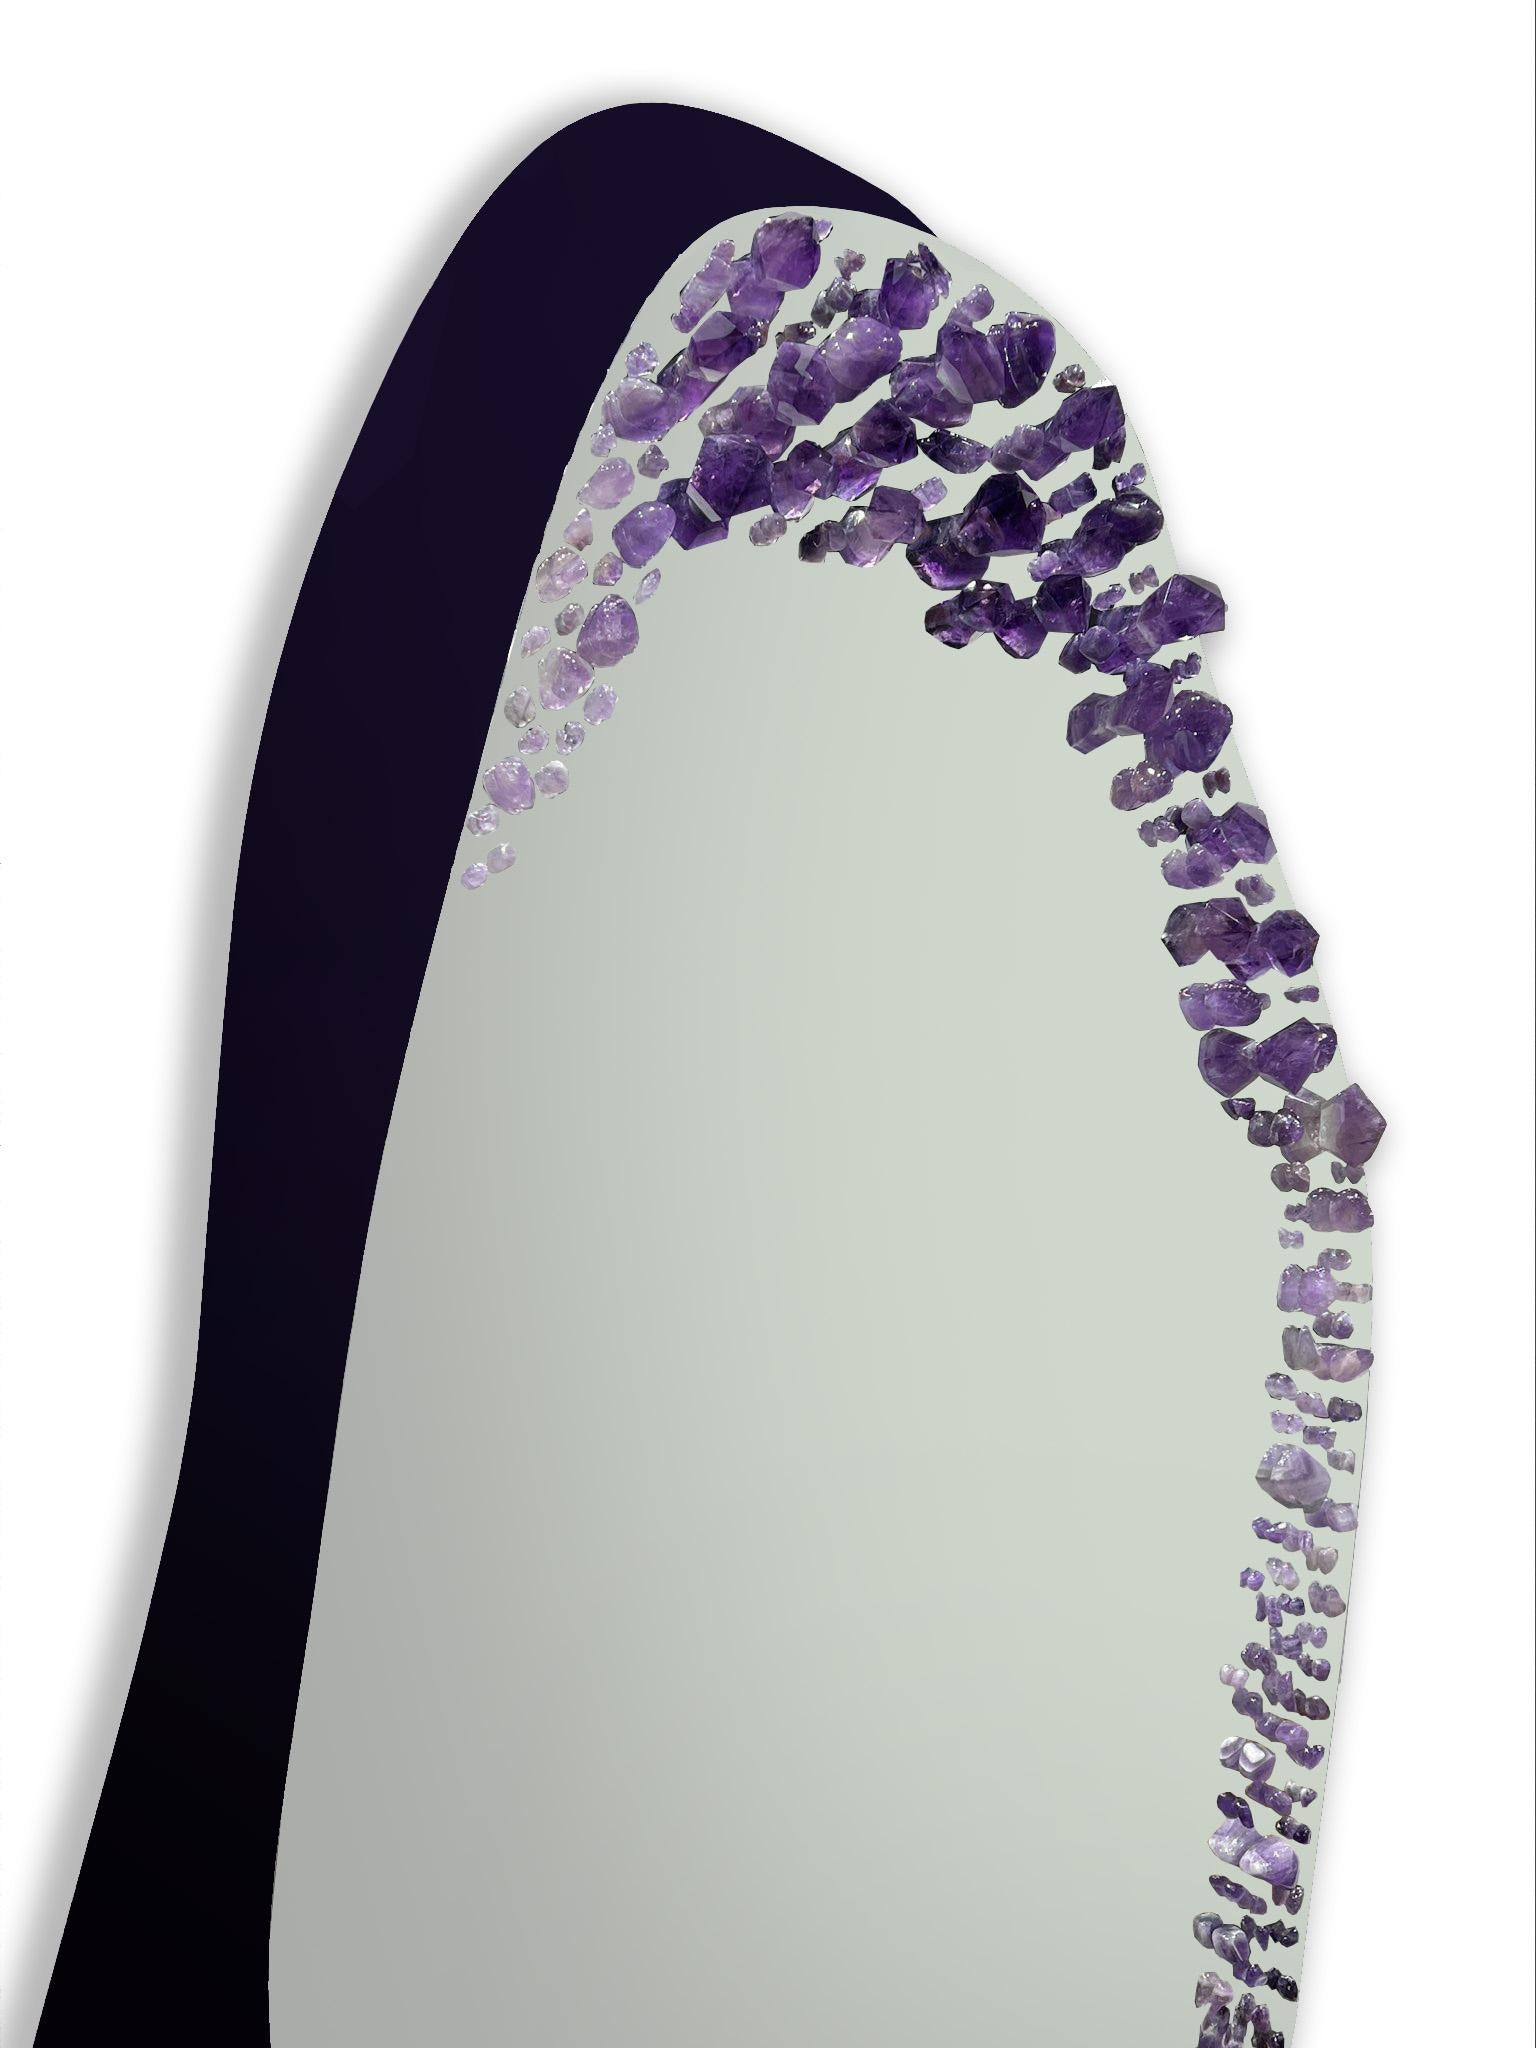 Swiss Wall Mirror, Adorned with Amethysts, Handmade by Aline Erbeia For Sale